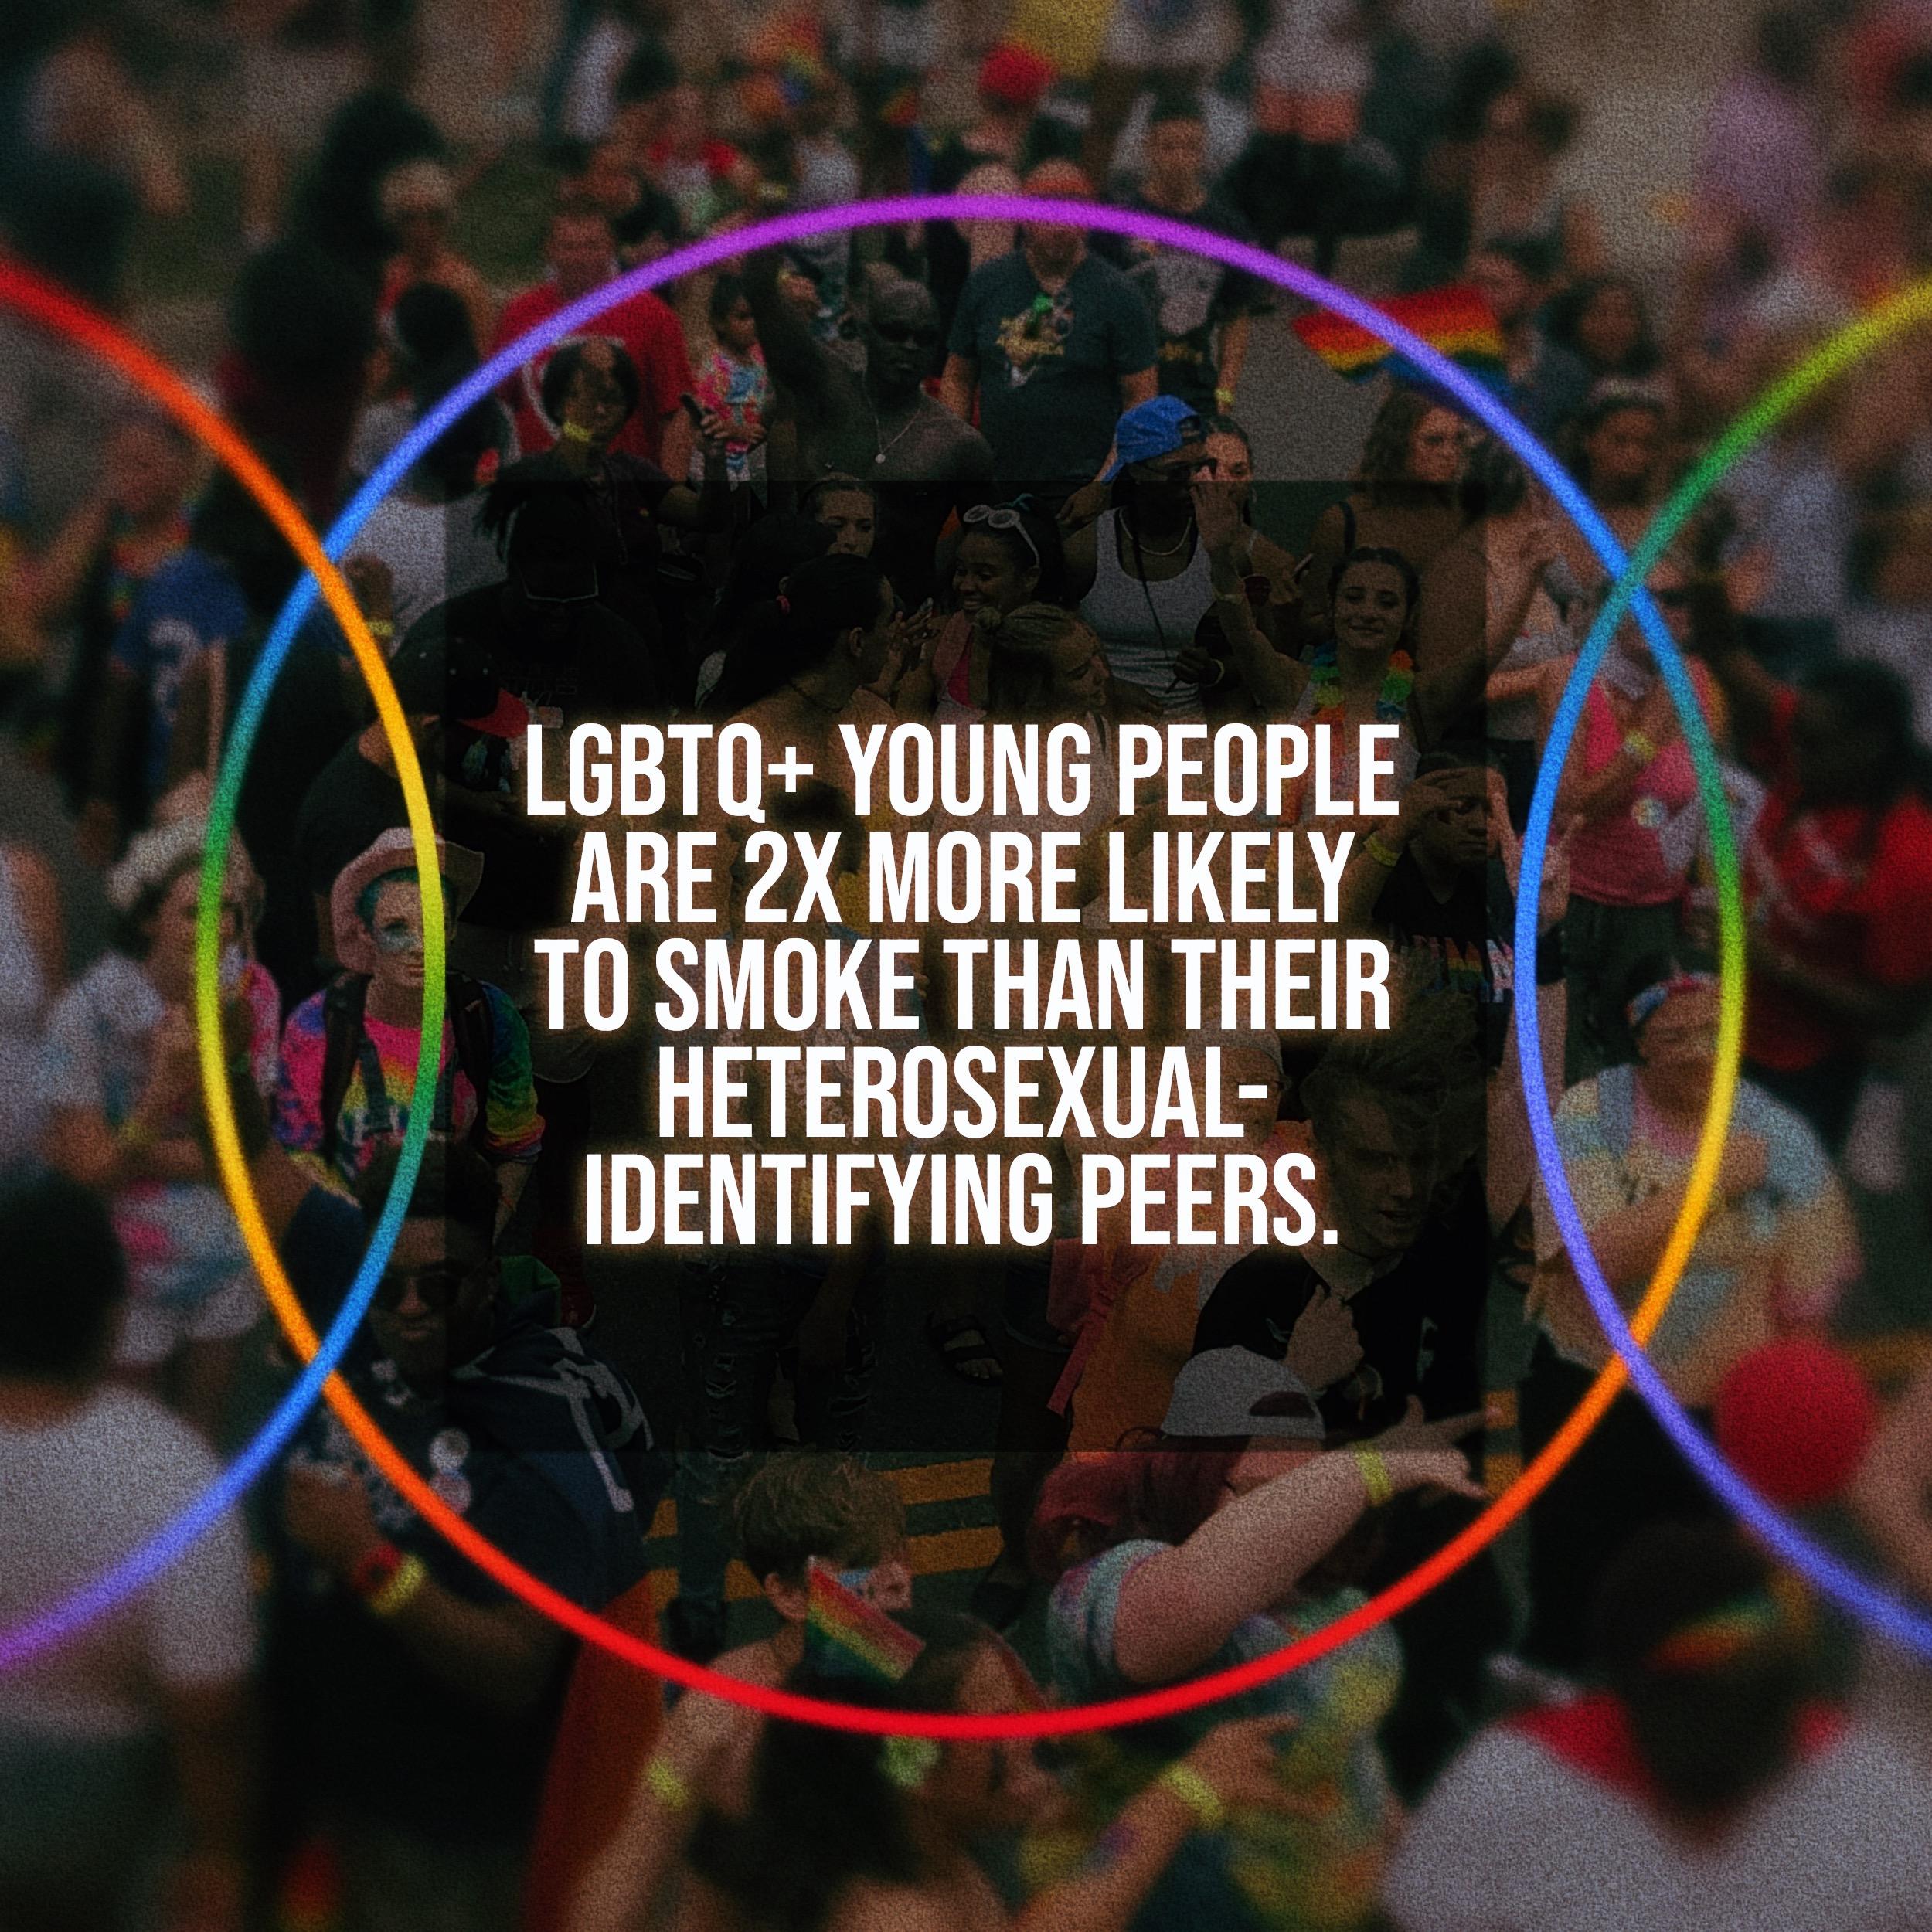 LGBTQ+ Young People are 2x more likely to smoke than their heterosexual-identifying peers. 